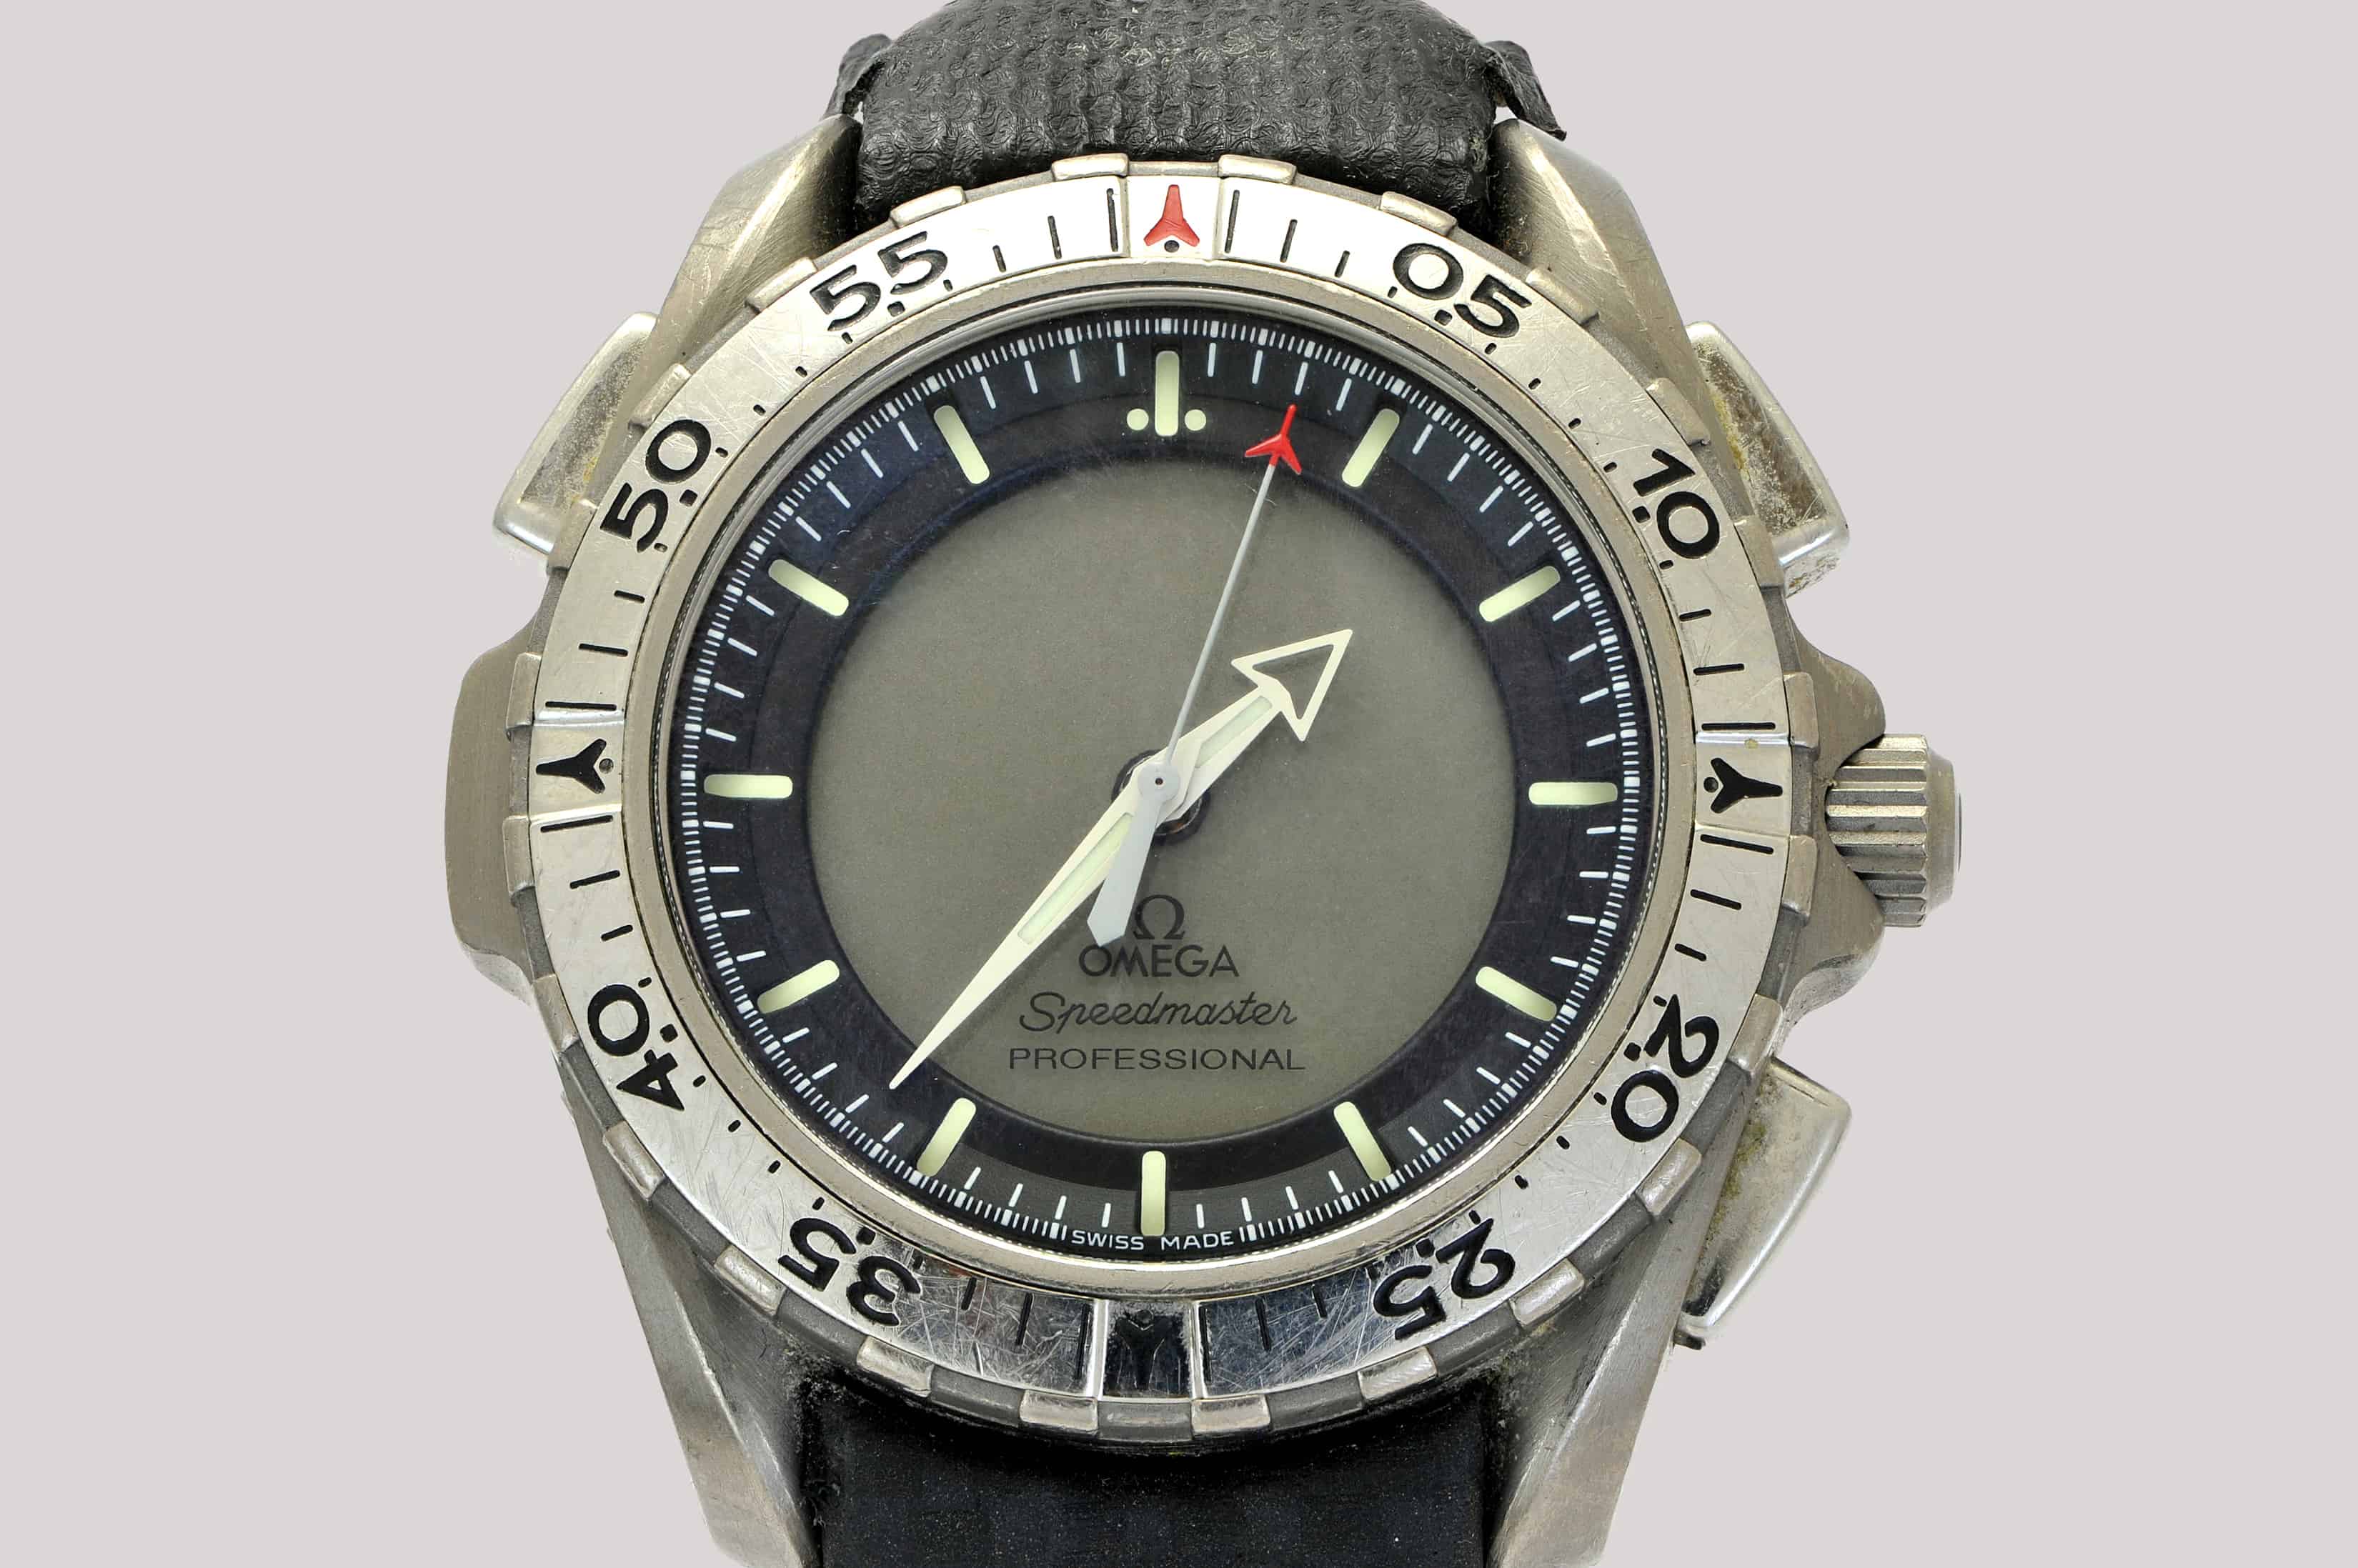 Up For Auction: The Story of Nikolai Budarin’s Flown Omega Speedmaster Professional X-33 